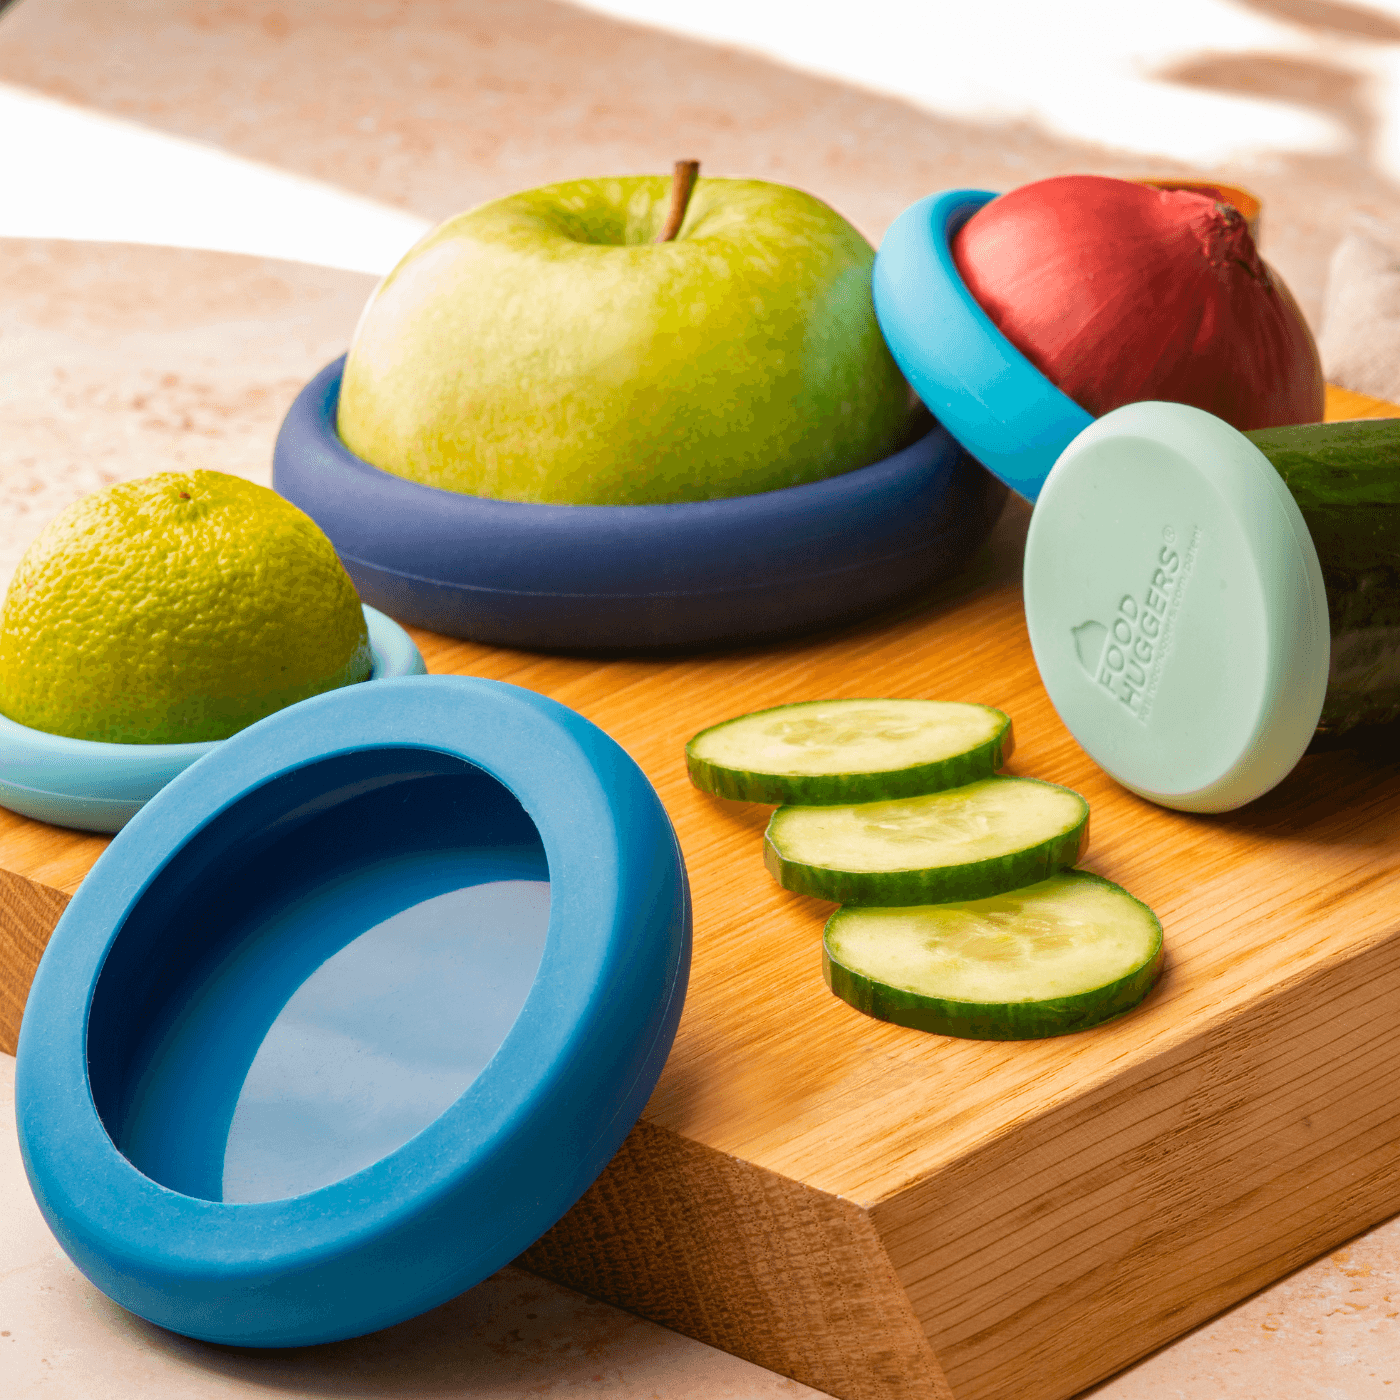 Set of five silicone Food Huggers, a sustainable alternative to plastic wrap, to protect fruits and vegetables on a wooden board